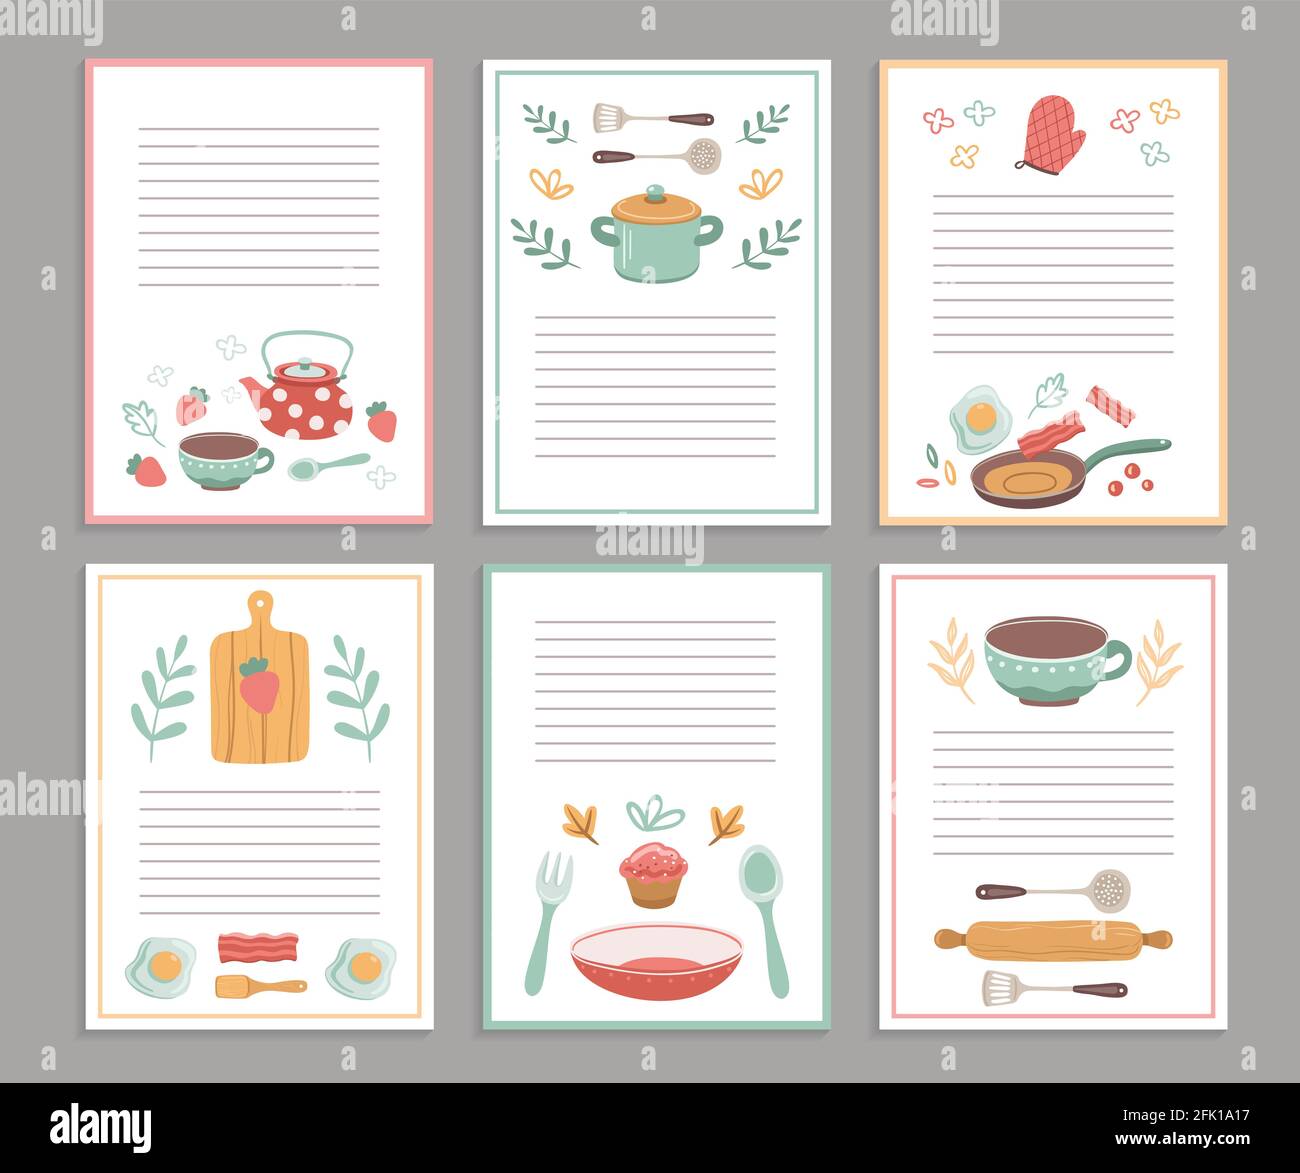 https://c8.alamy.com/comp/2FK1A17/recipe-cards-culinary-book-blank-pages-cookbook-stickers-cute-home-menu-banners-for-baking-cooking-with-doodle-kitchen-tools-vector-set-2FK1A17.jpg